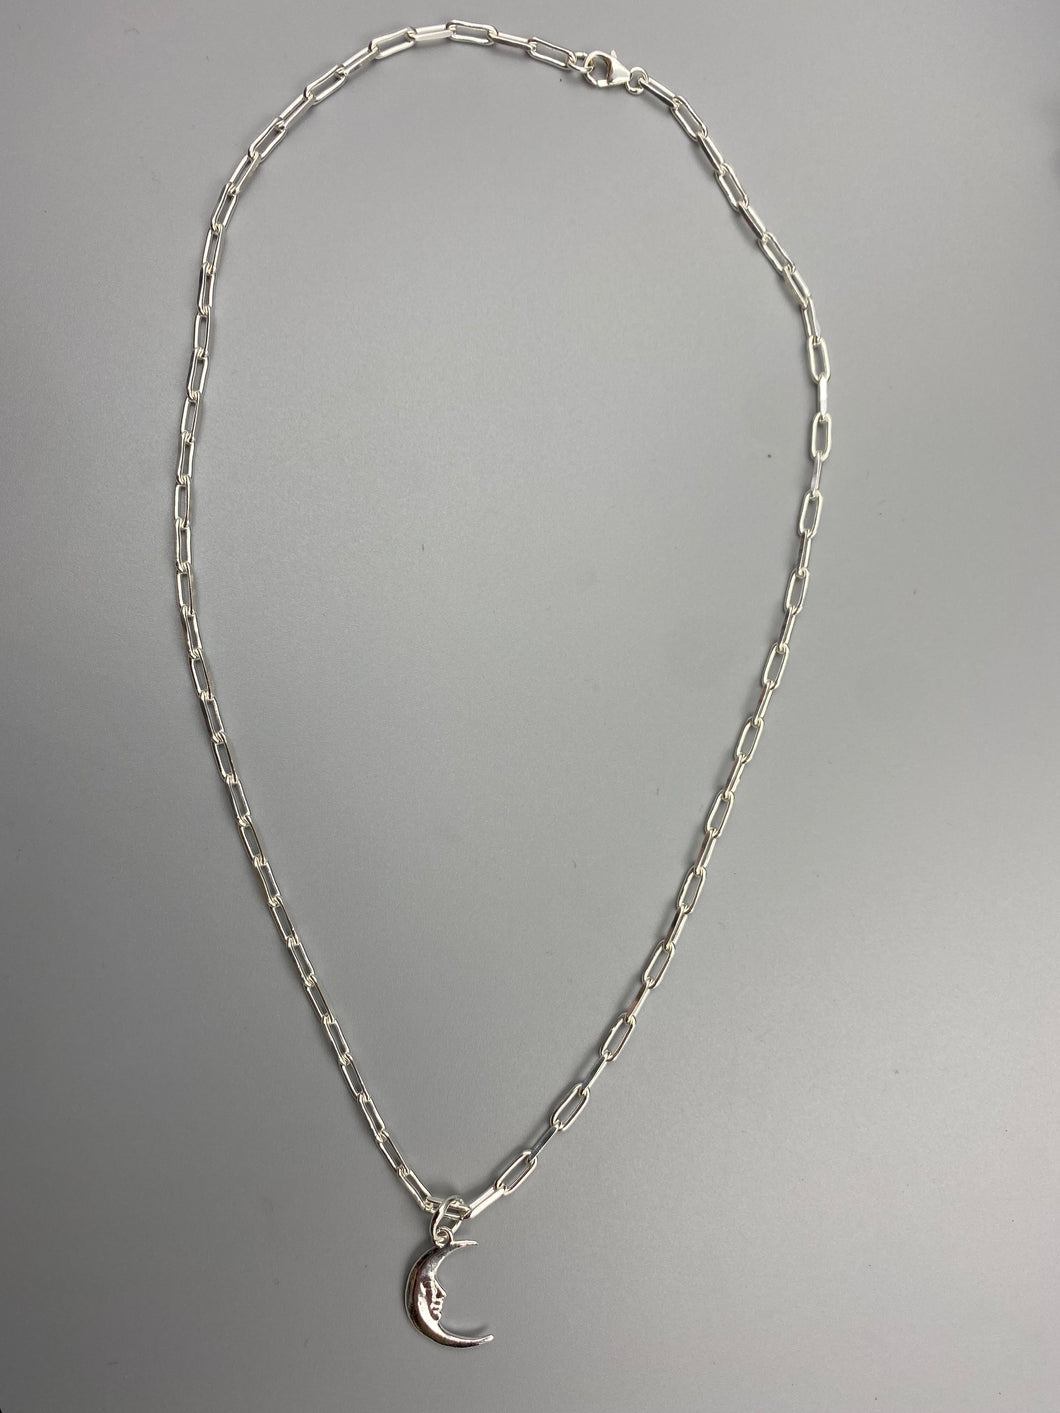 Moon charm trace chain necklace in Sterling Silver